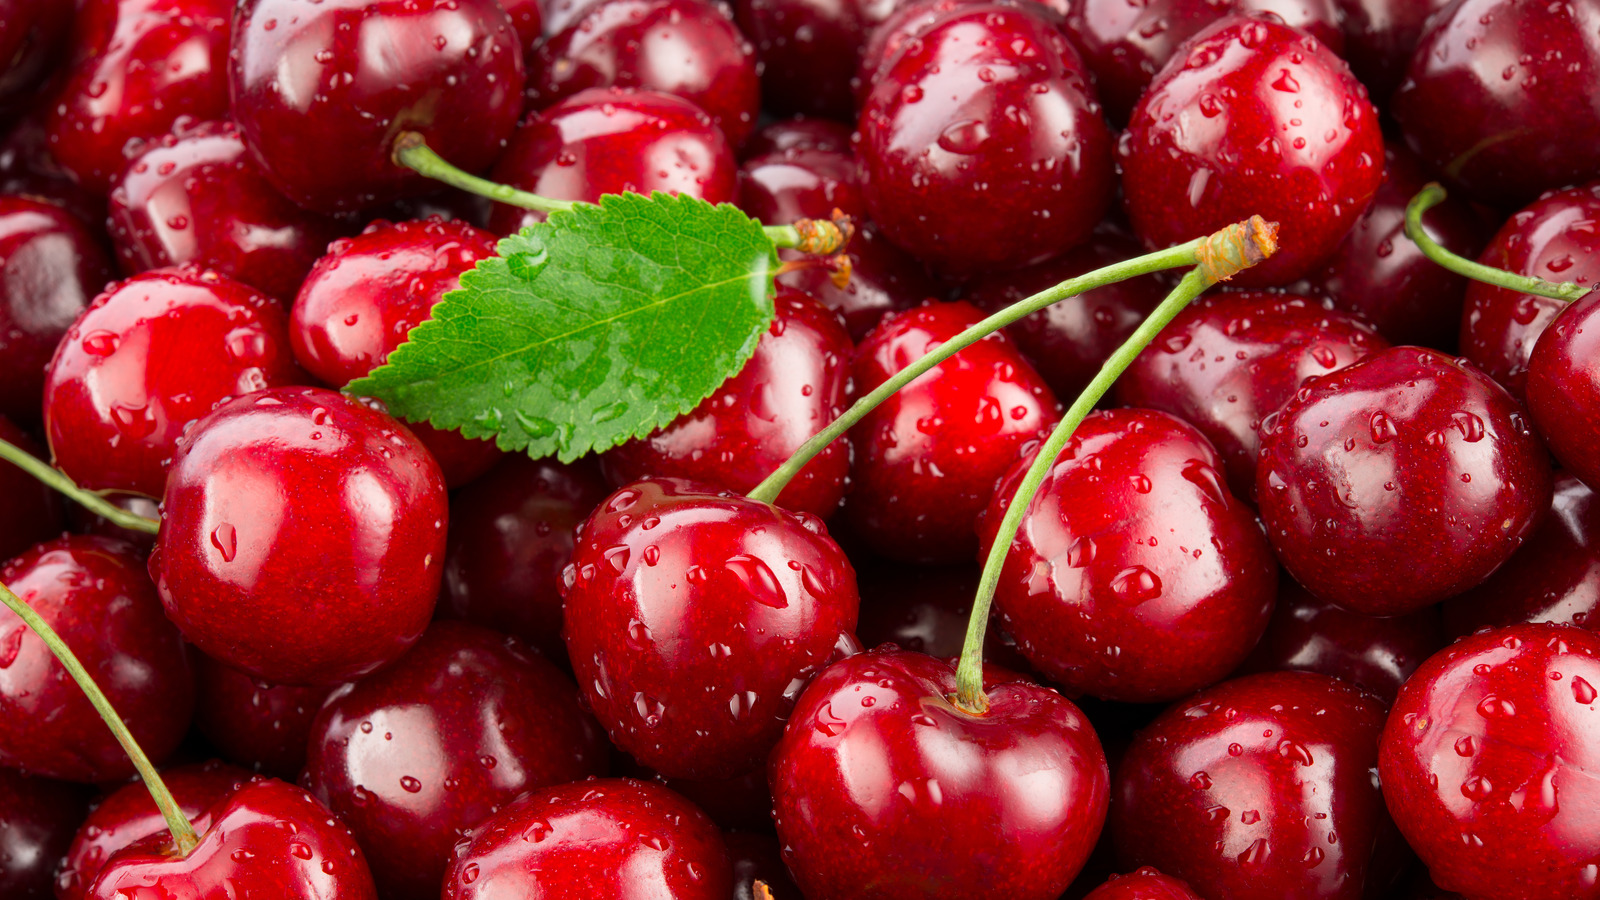 The Huge Summer Cherry Festival You Probably Didn't Know About